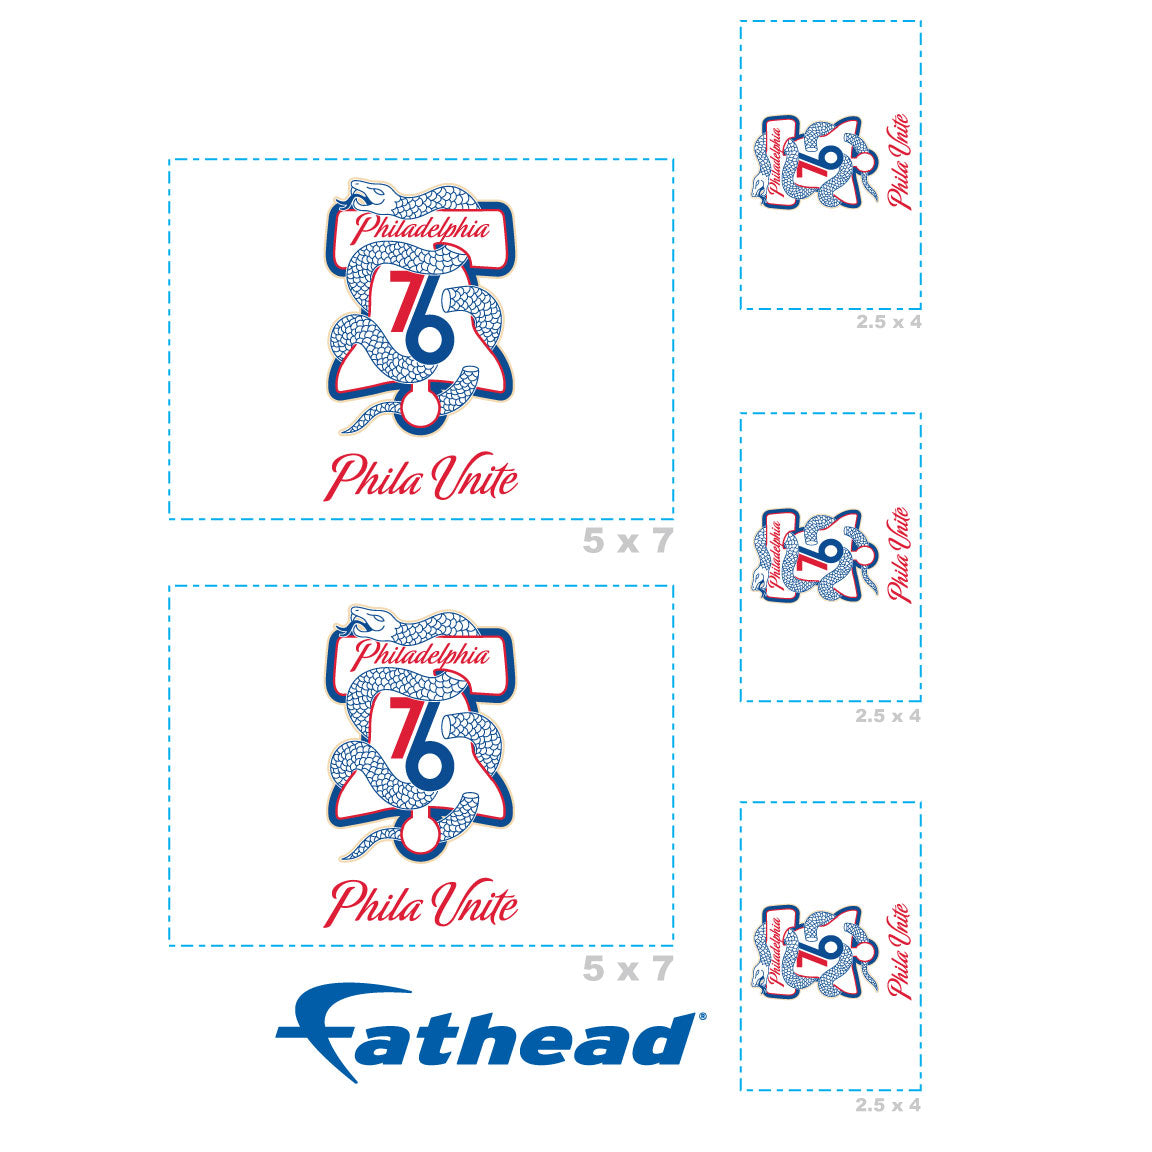 Sheet of 5 -Philadelphia 76ers: Hype Logo Minis - Officially Licensed NBA Removable Adhesive Decal